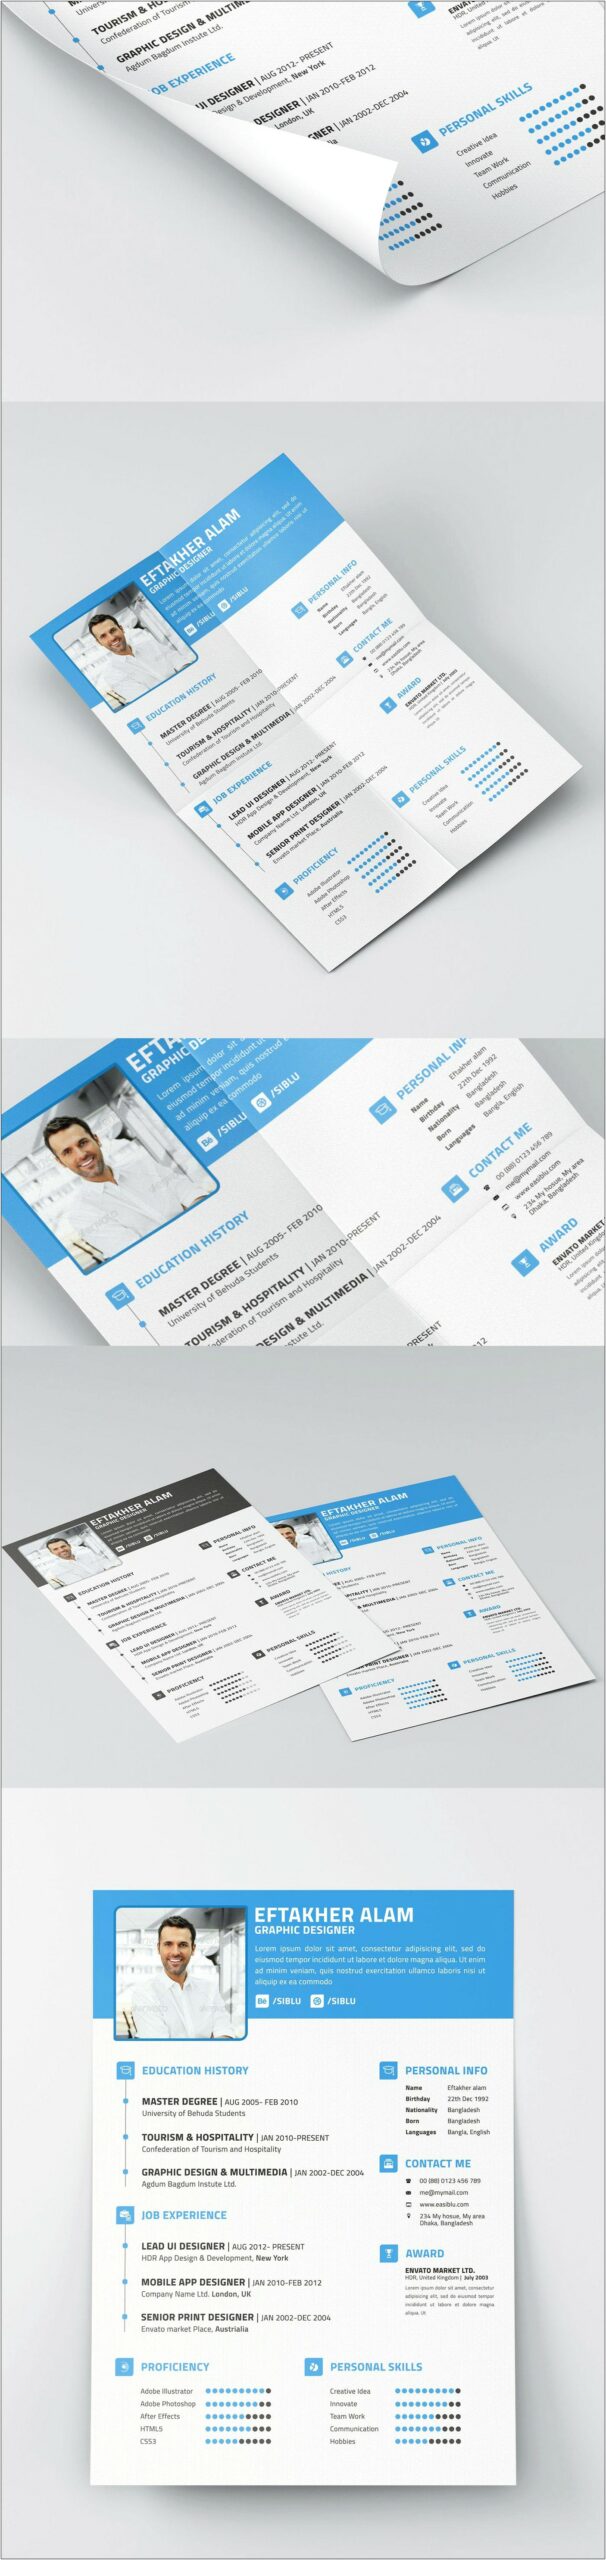 Best Free Resume Template No Credit Card